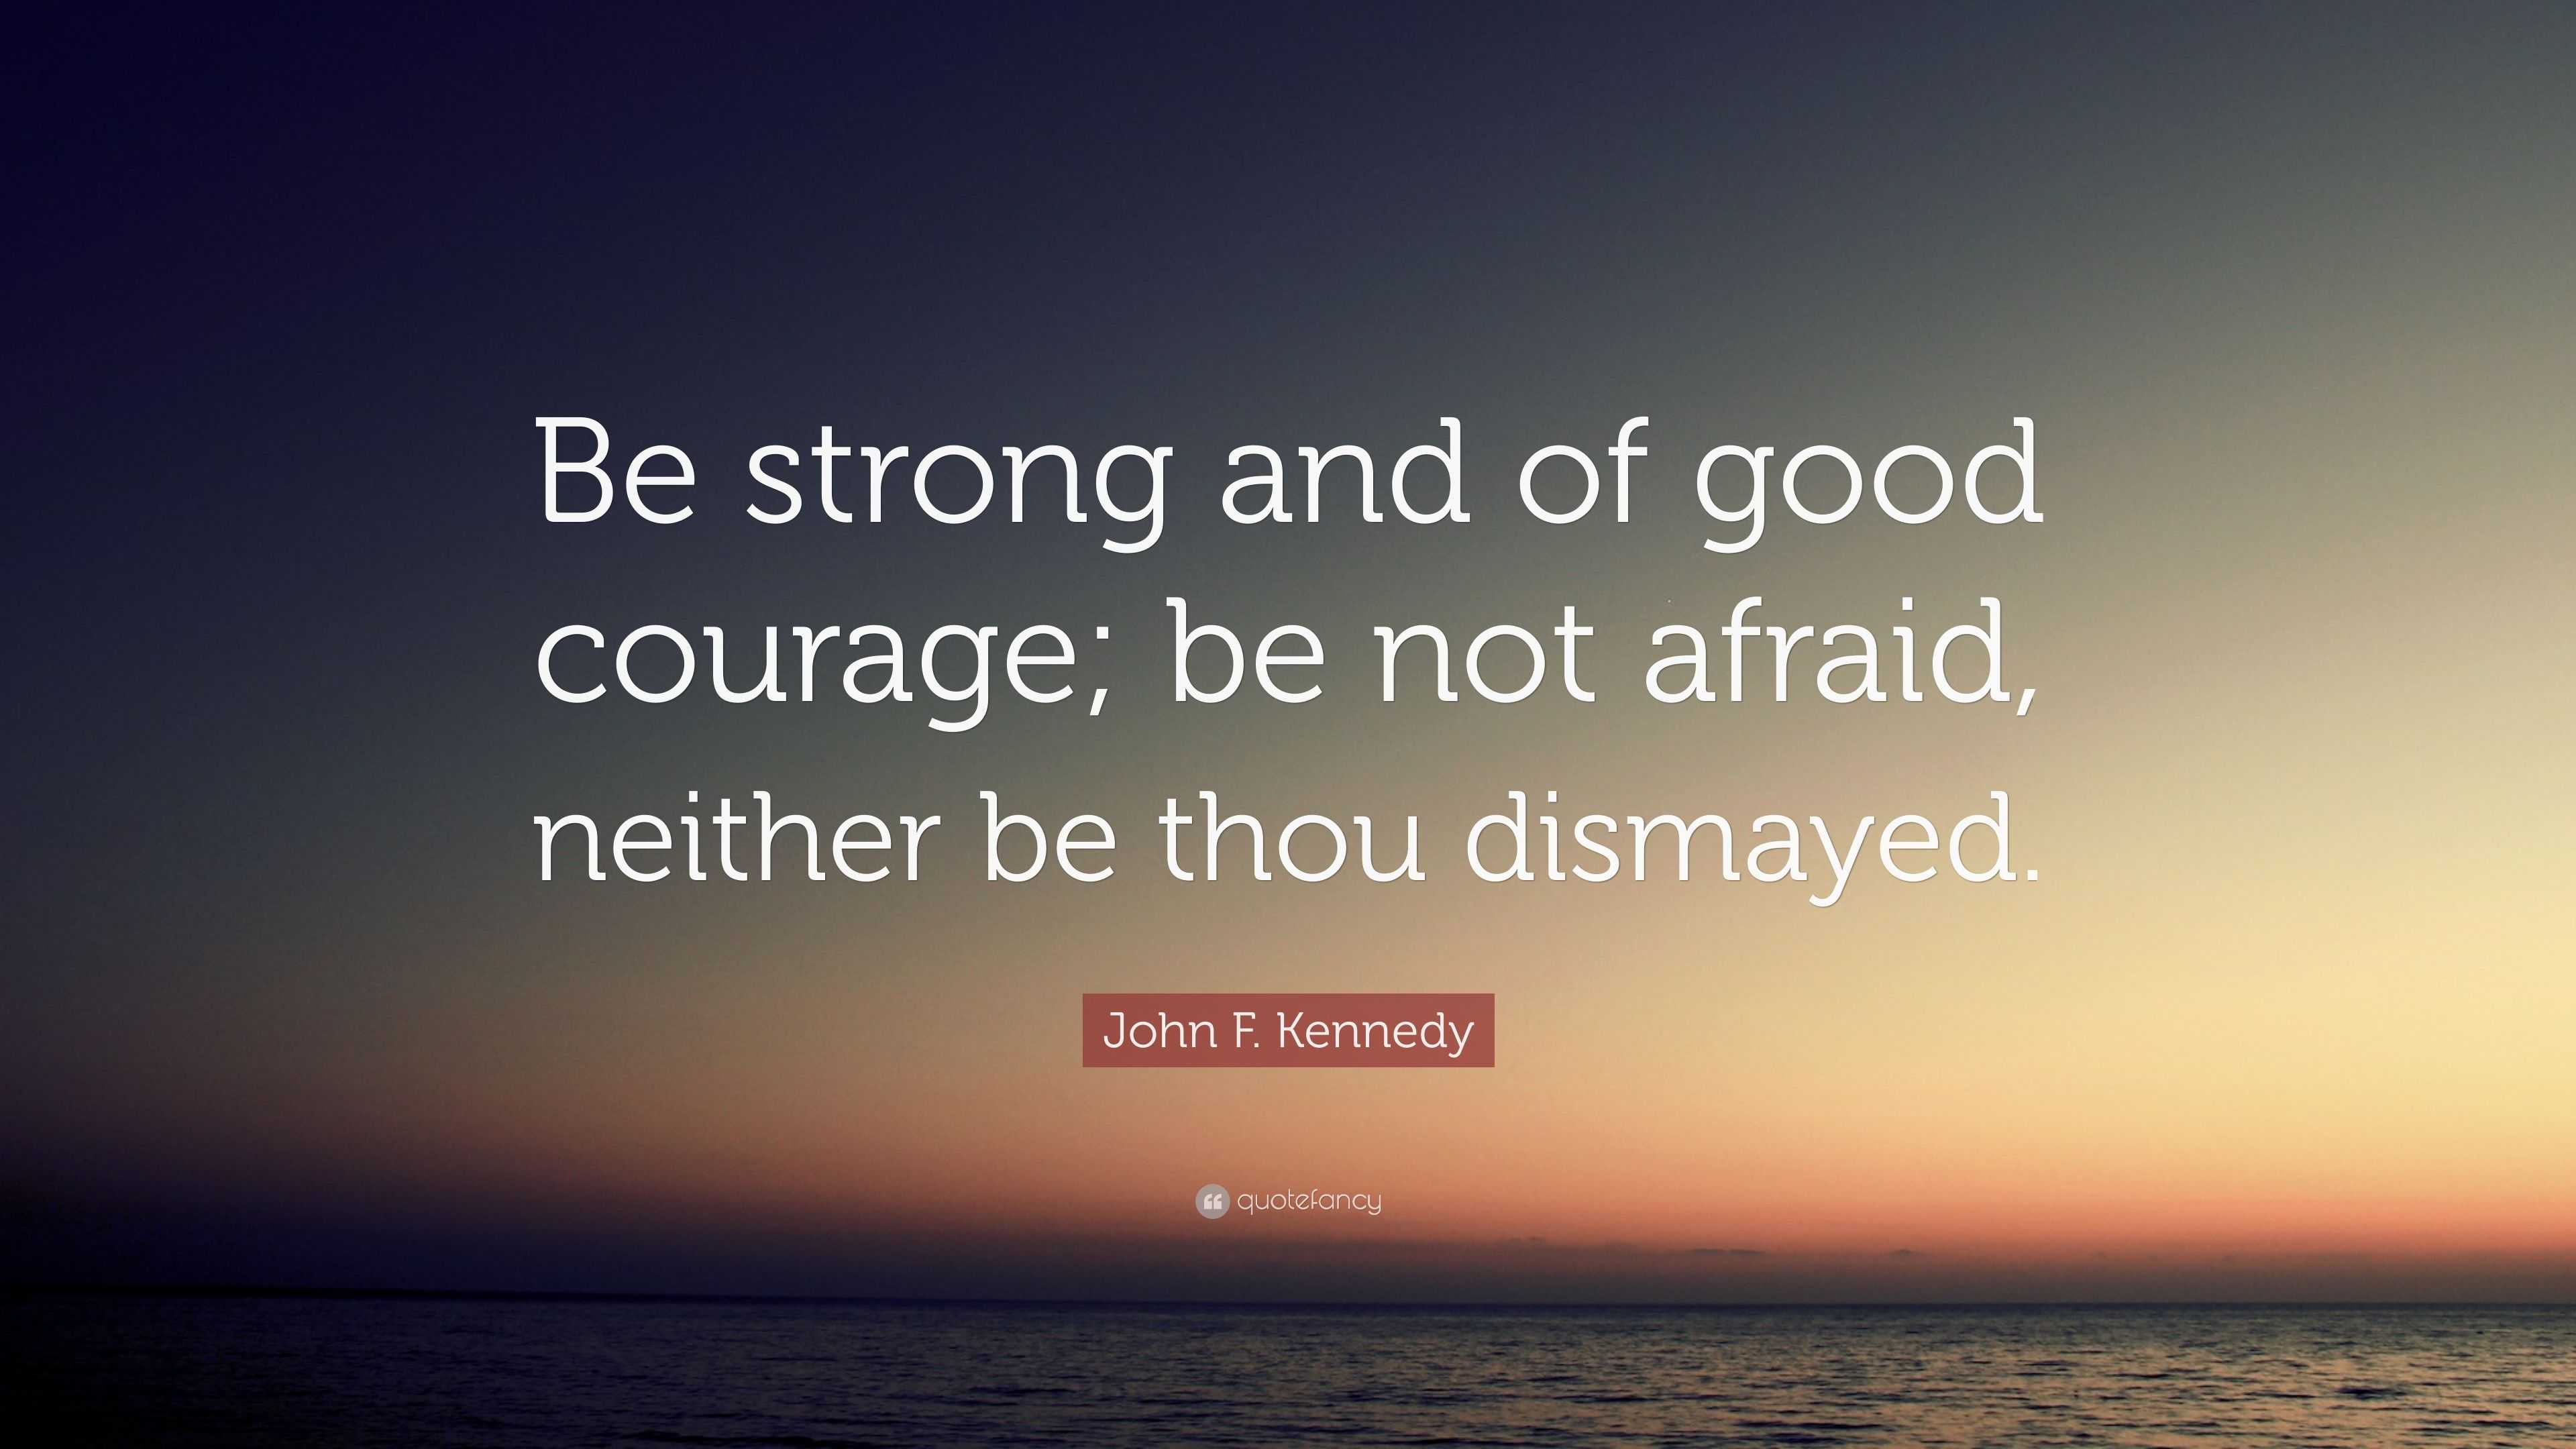 John F. Kennedy Quote: “Be strong and of good courage; be not afraid